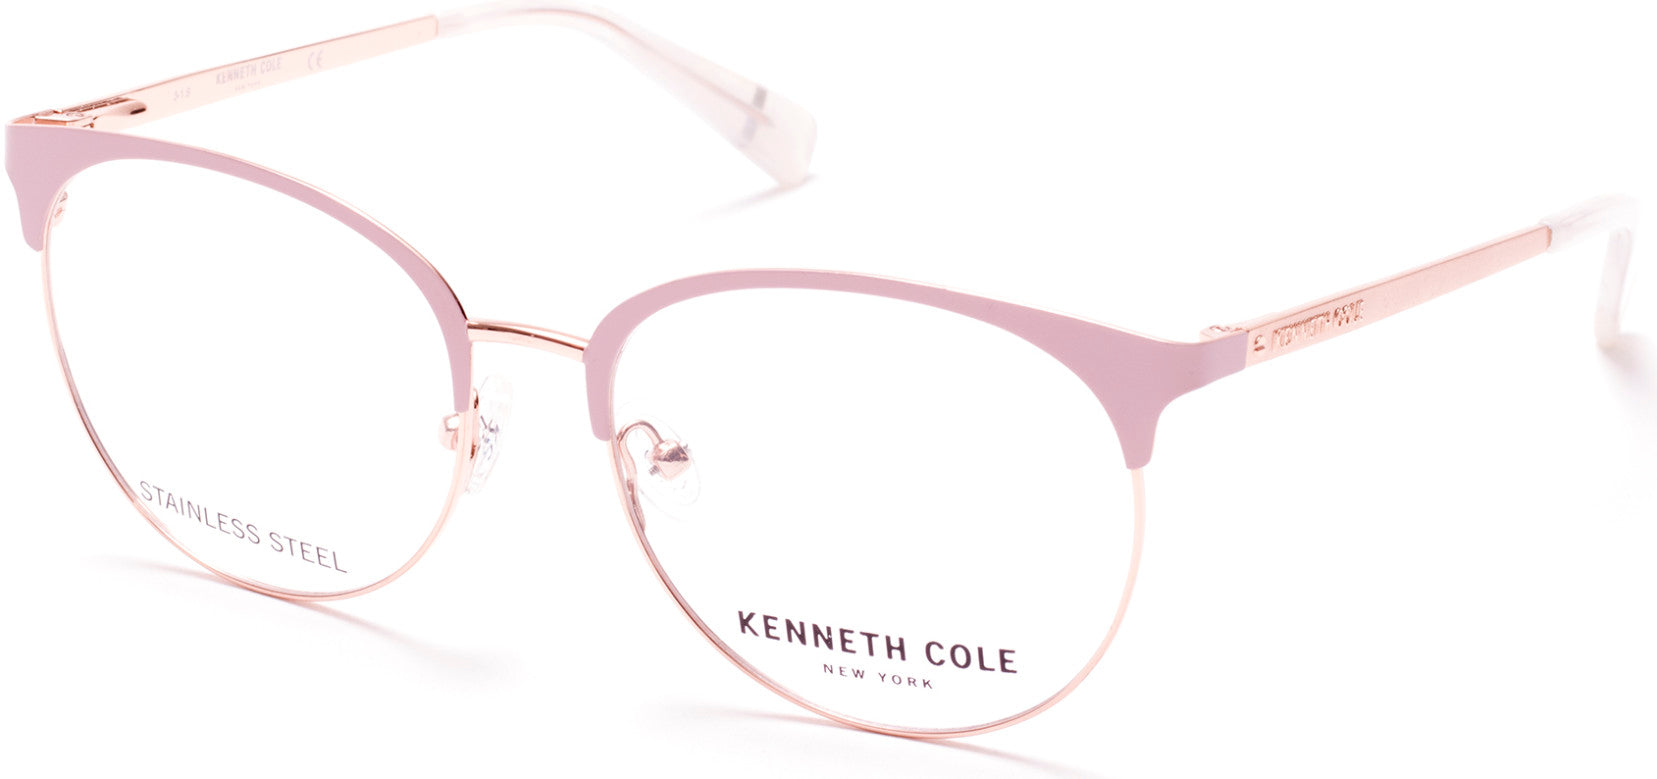 Kenneth Cole New York,Kenneth Cole Reaction KC0289 Round Eyeglasses 073-073 - Matte Pink